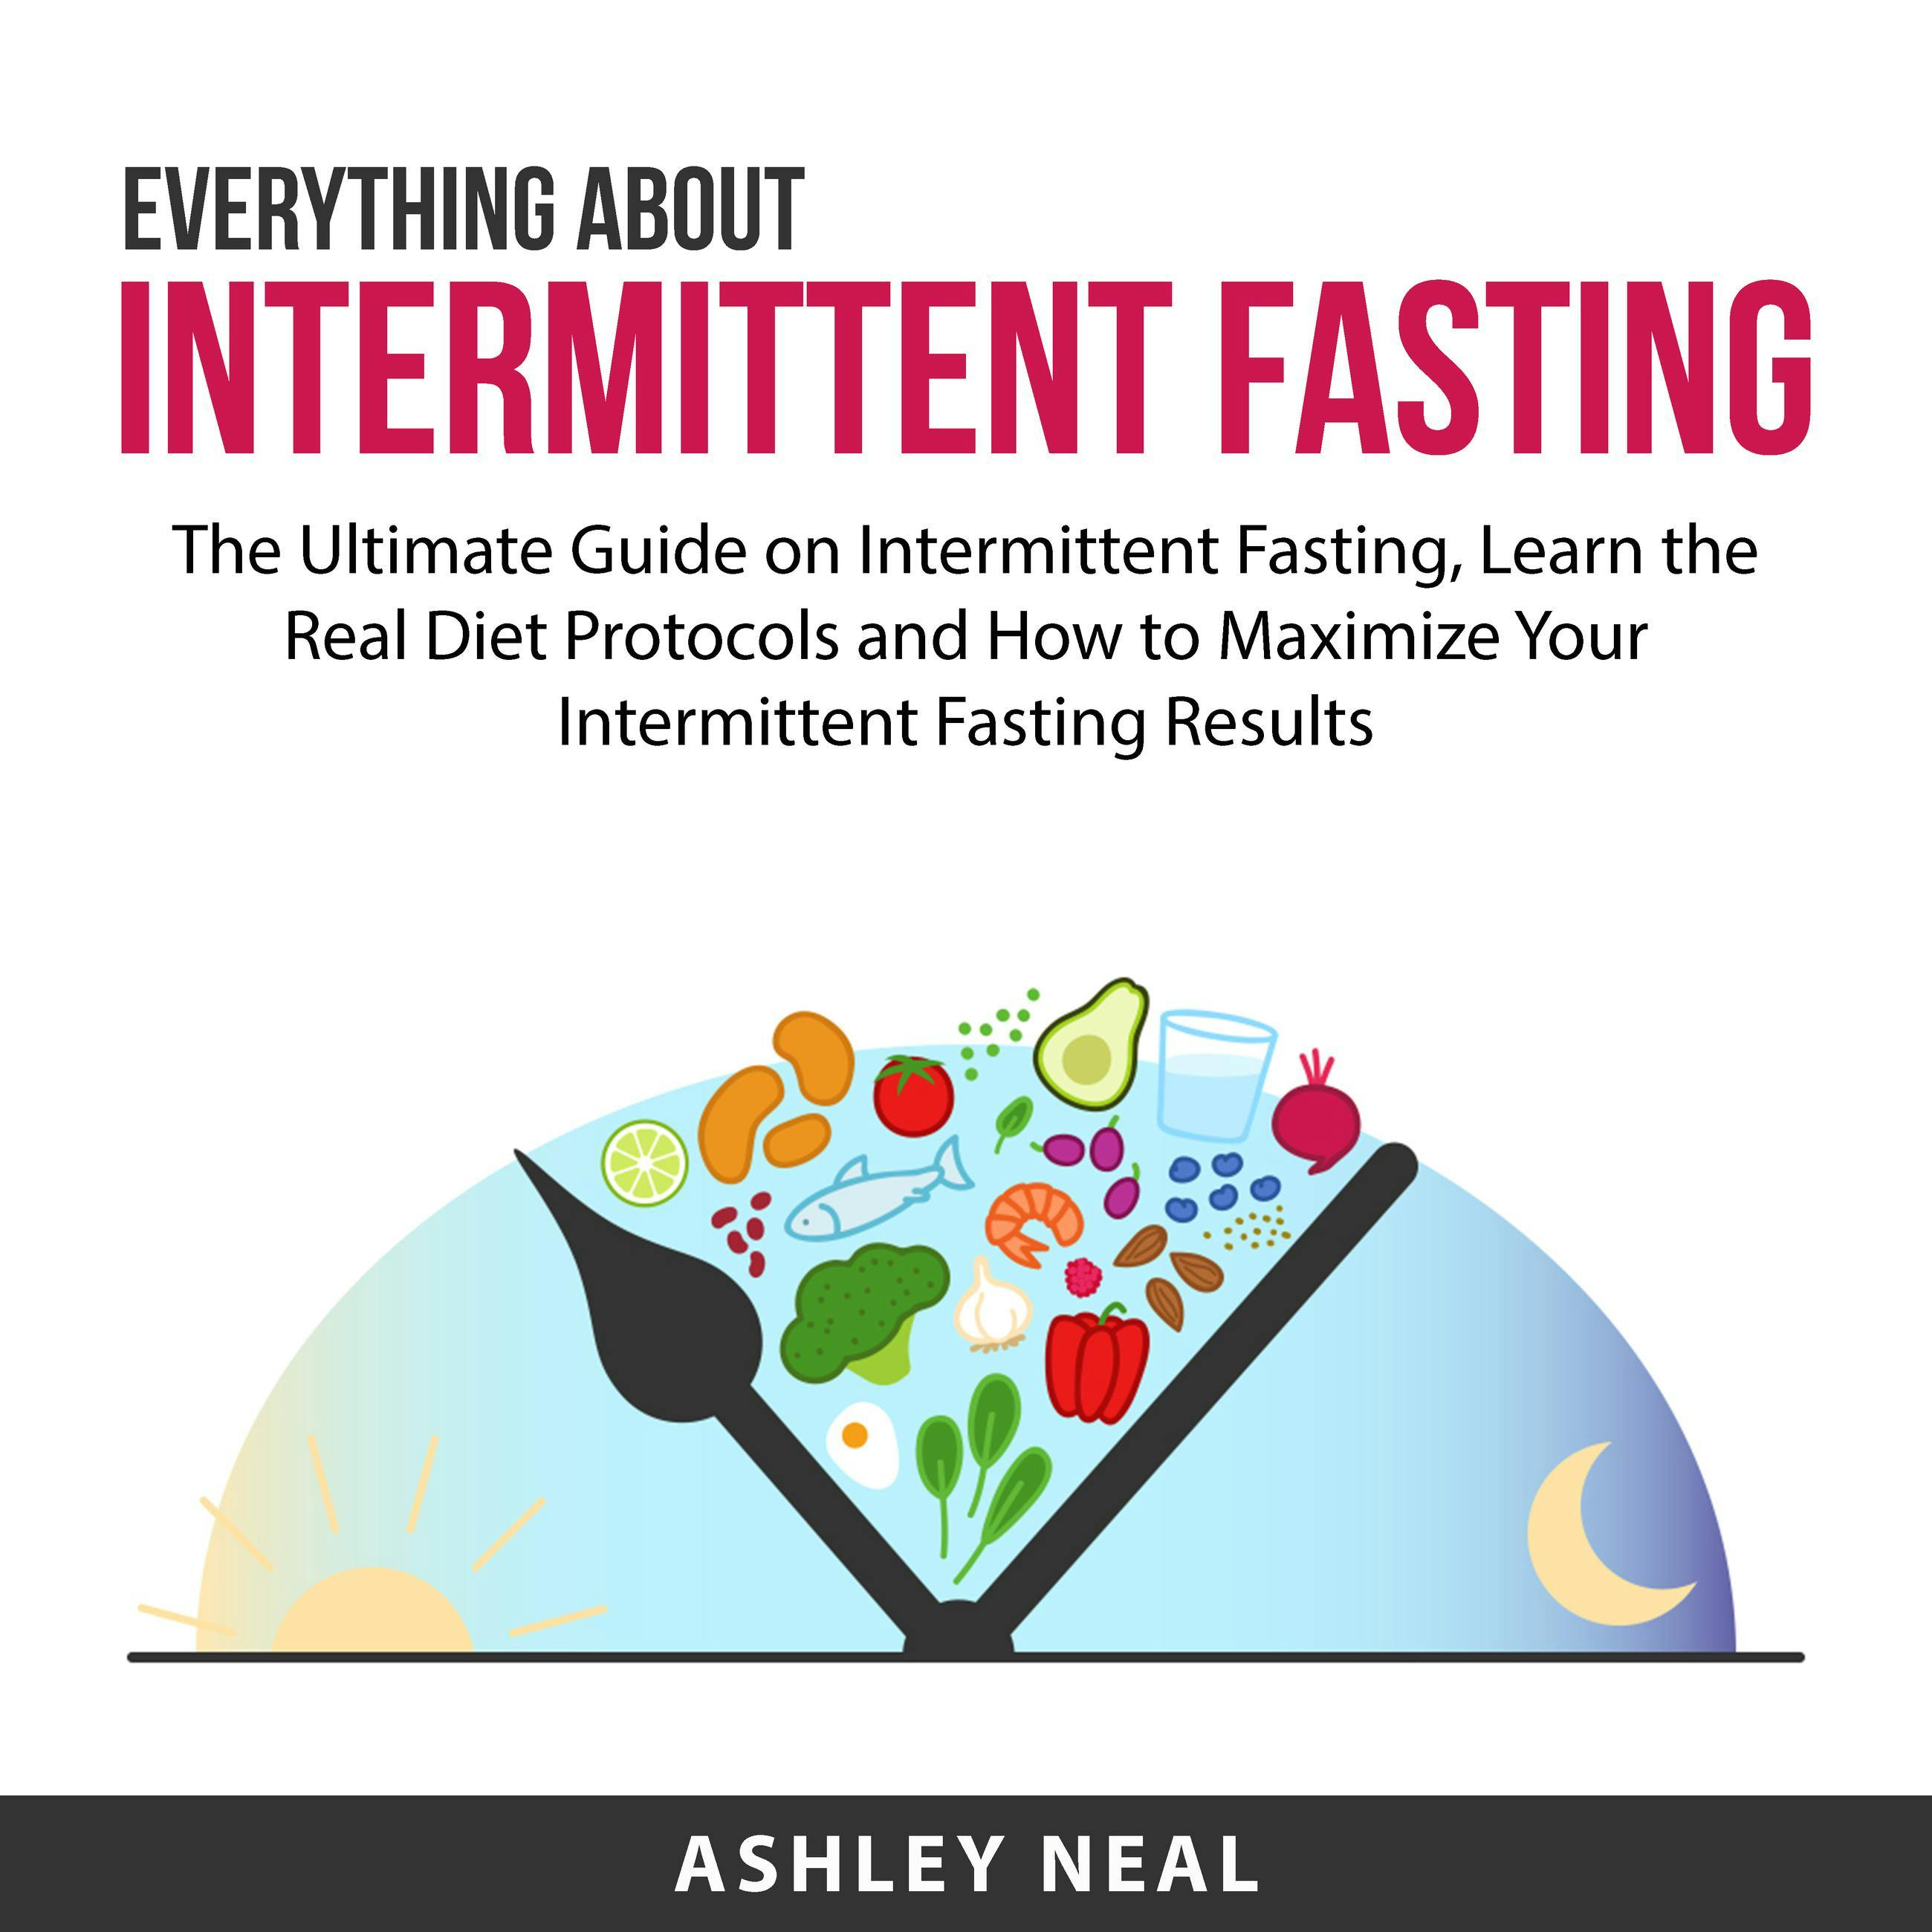 Everything About Intermittent Fasting: The Ultimate Guide on Intermittent Fasting, Learn the Real Diet Protocols and How to Maximize Your Intermittent Fasting Results - undefined